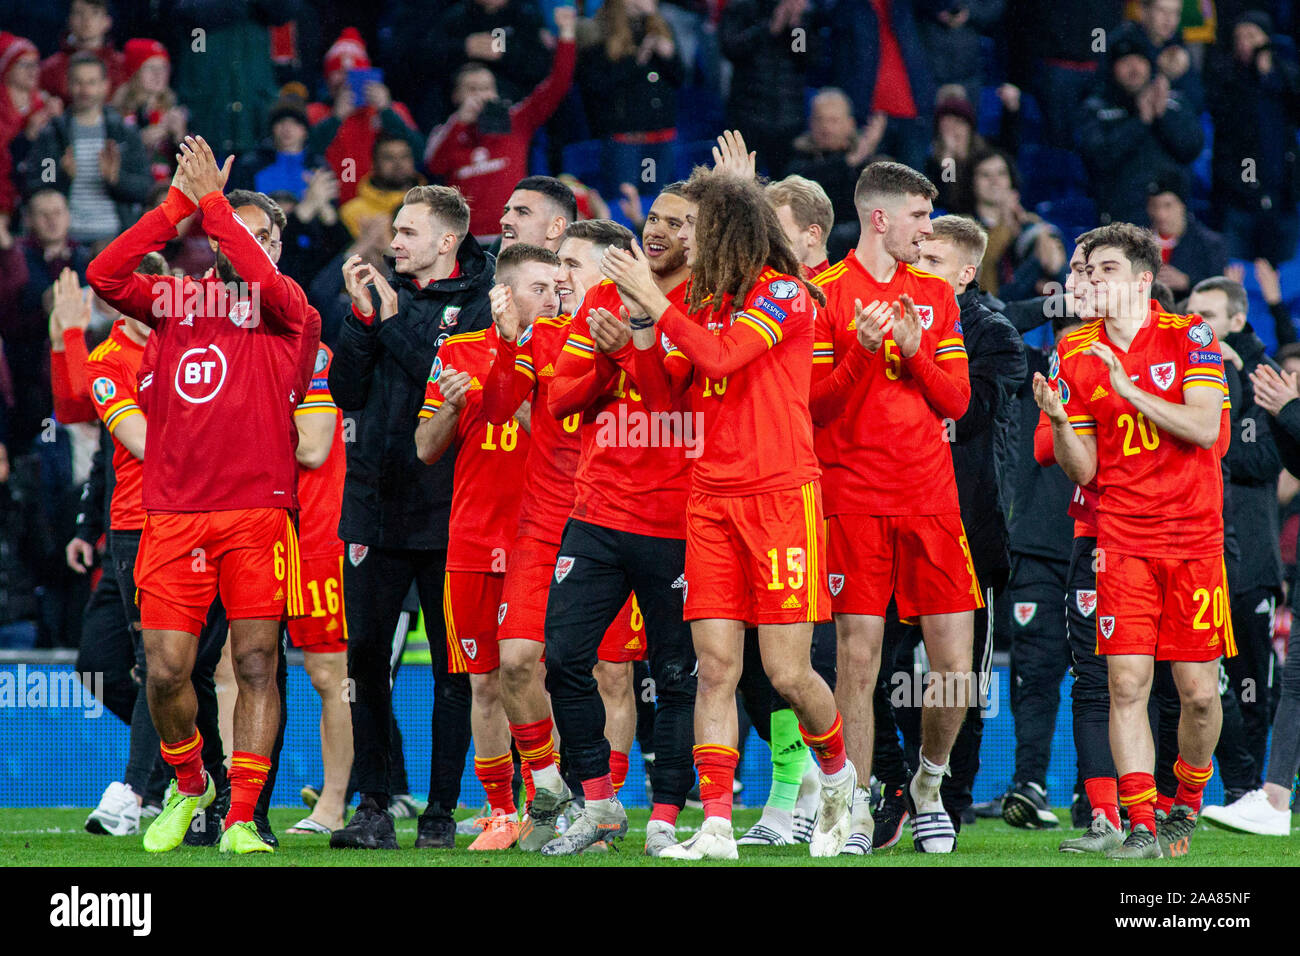 Cardiff, UK. 19th Nov, 2019. Wales players celebrates qualification. UEFA Euro 2020 qualifier group E match, Wales v Hungary at the Cardiff city Stadium in Cardiff, South Wales on Tuesday 19th November 2019. pic by Lewis Mitchell/Andrew Orchard sports photography/Alamy live News EDITORIAL USE ONLY Credit: Andrew Orchard sports photography/Alamy Live News Stock Photo